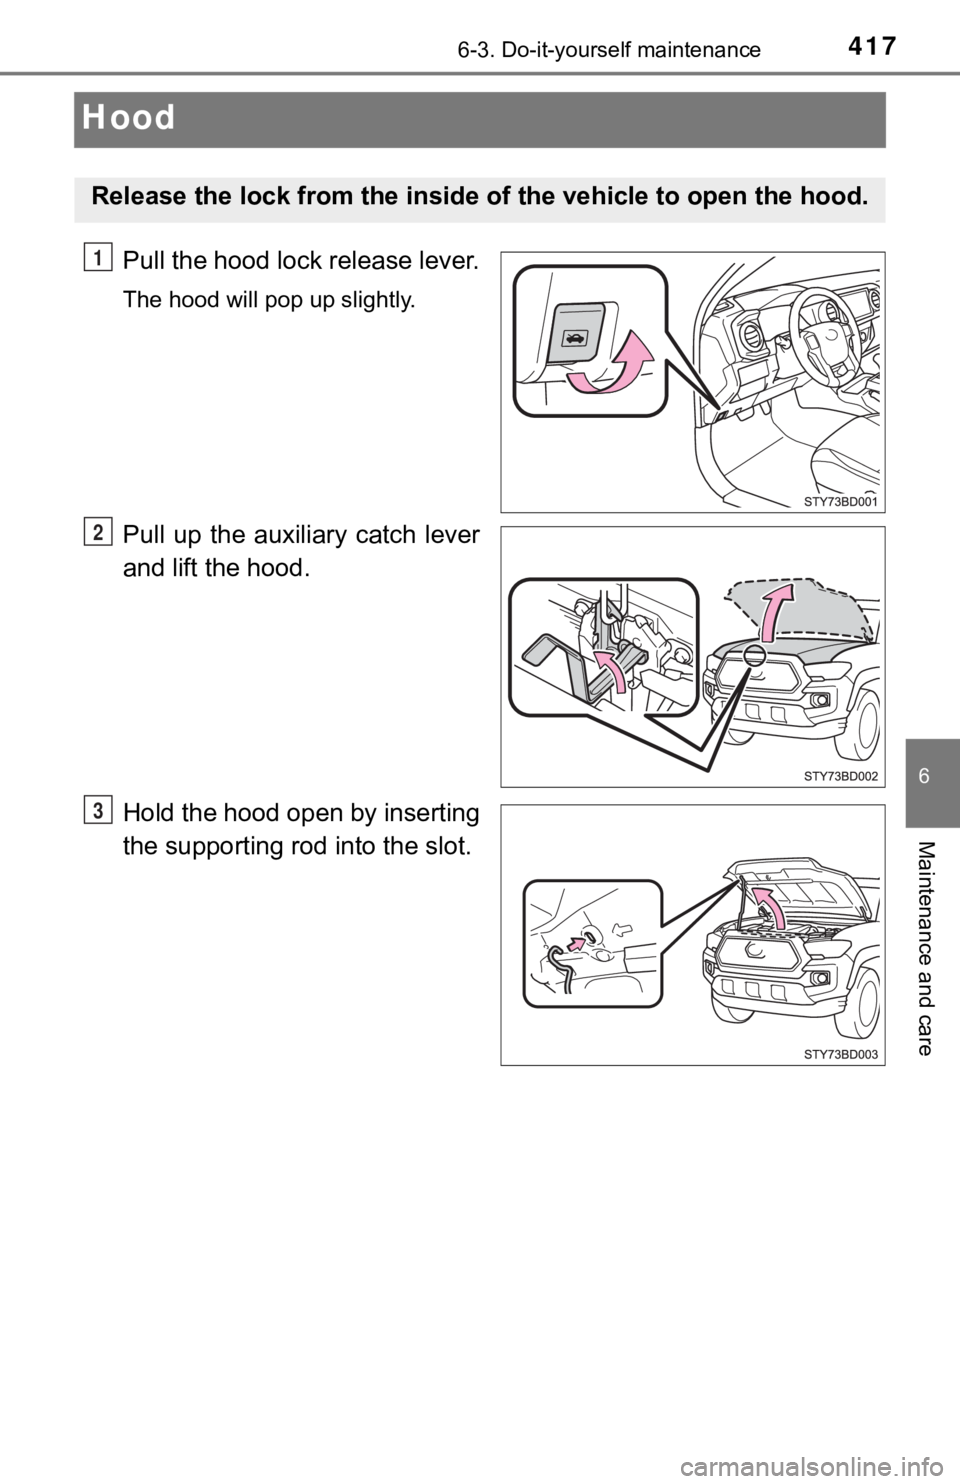 TOYOTA TUNDRA 2022  Owners Manual 4176-3. Do-it-yourself maintenance
6
Maintenance and care
Hood
Pull the hood lock release lever.
The hood will pop up slightly.
Pull  up  the  auxiliary  catch  lever
and lift the hood.
Hold the hood 